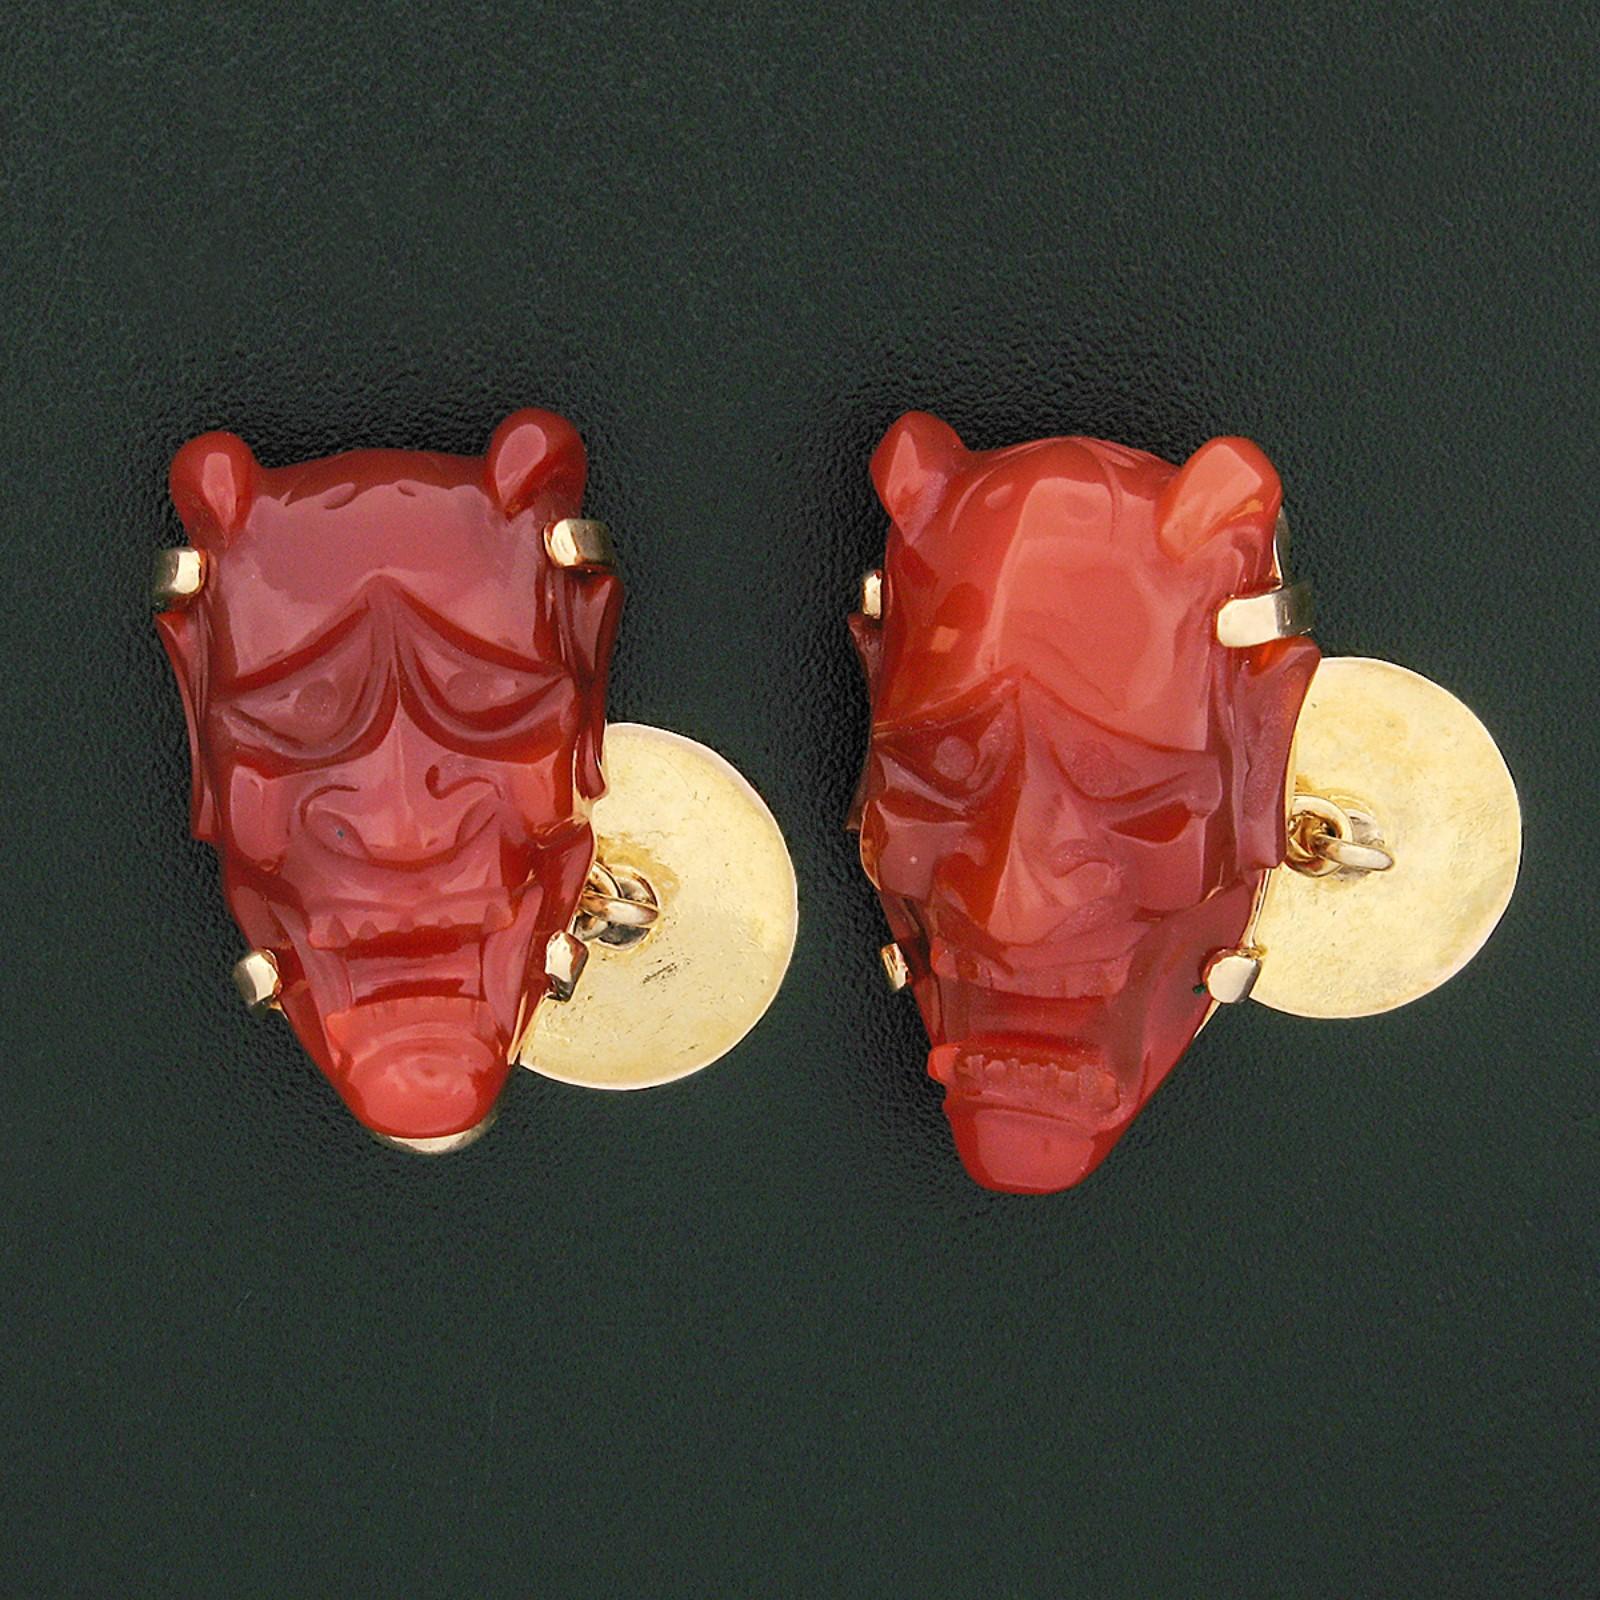 Here we have a vintage pair of hand carved carnelian cuff links crafted from solid 14k yellow gold. Each of the cuff links feature a large piece of carnelian hand carved into the shape of a Japanese-style demon or The Hannya mask. One of the stones